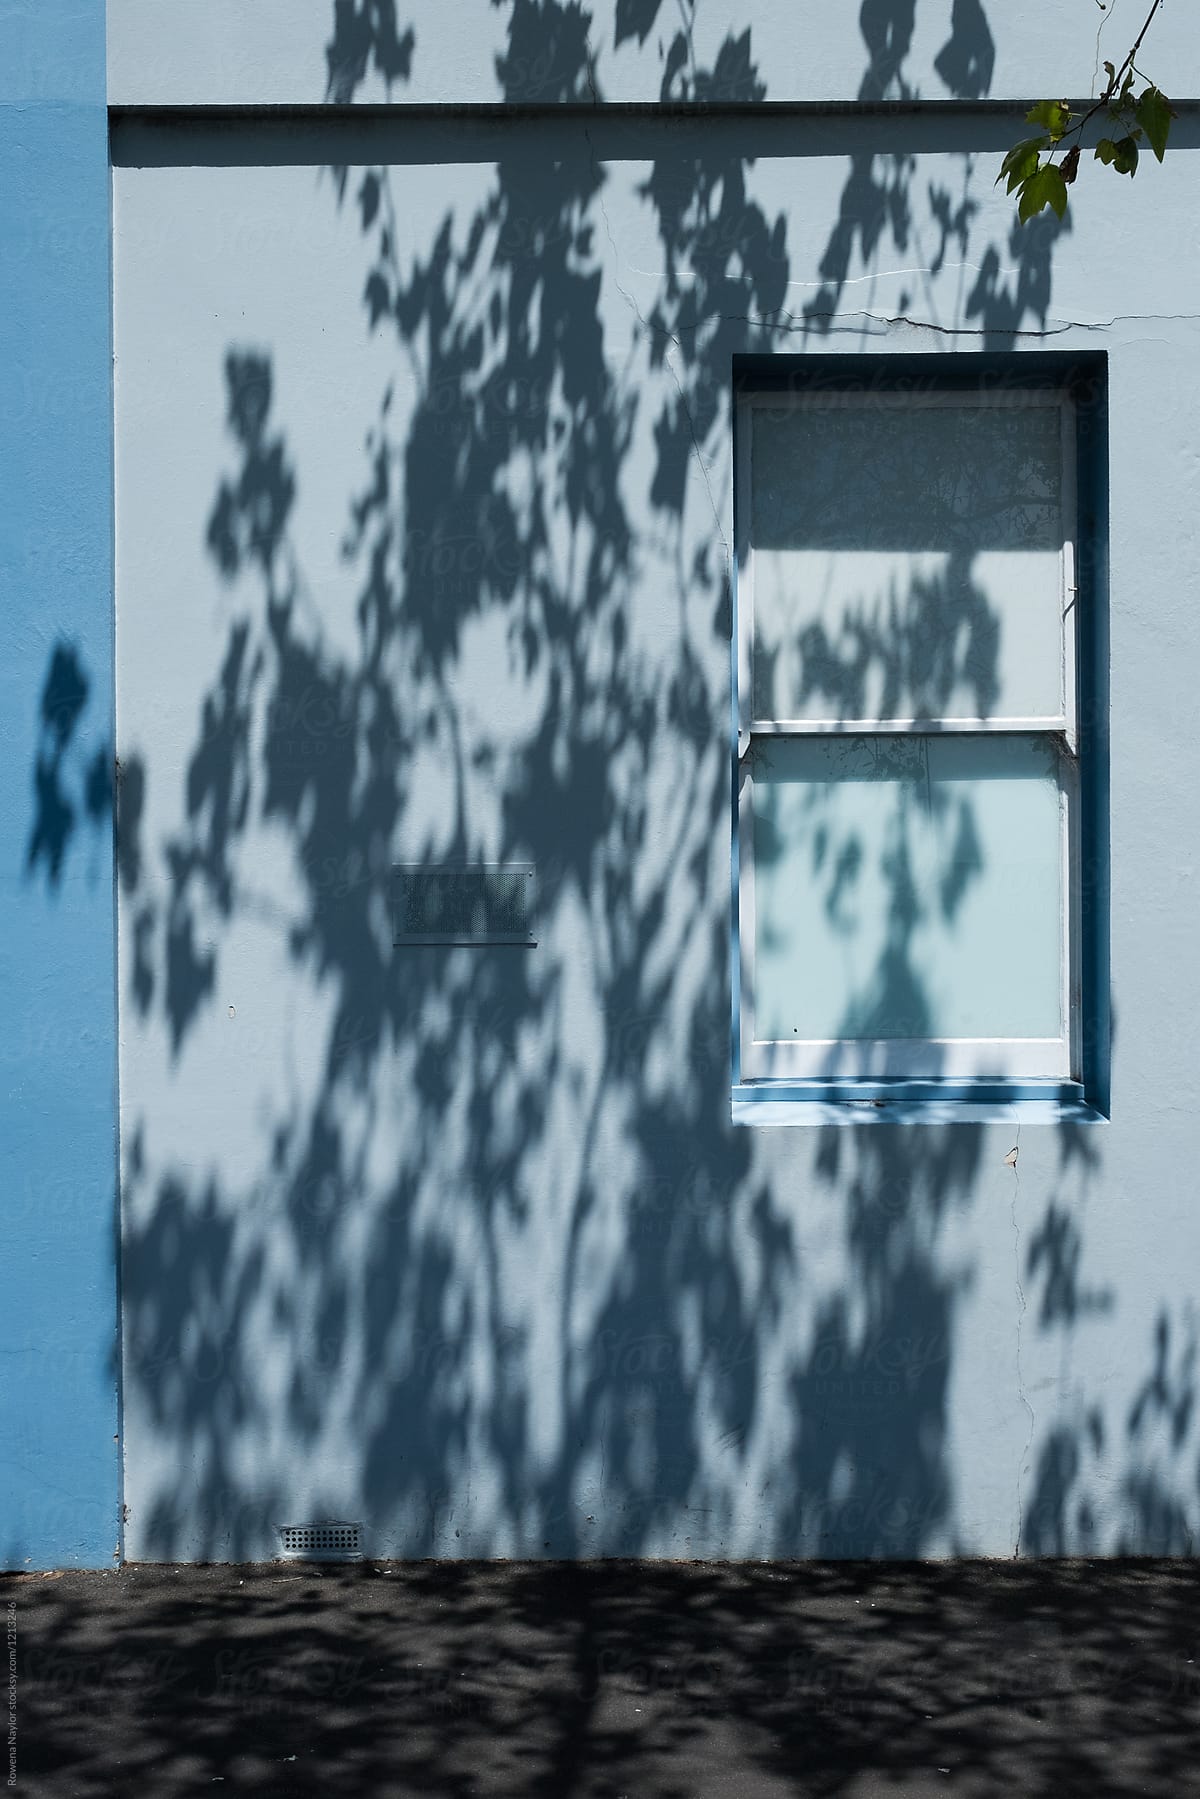 Shadows from trees on blue walls